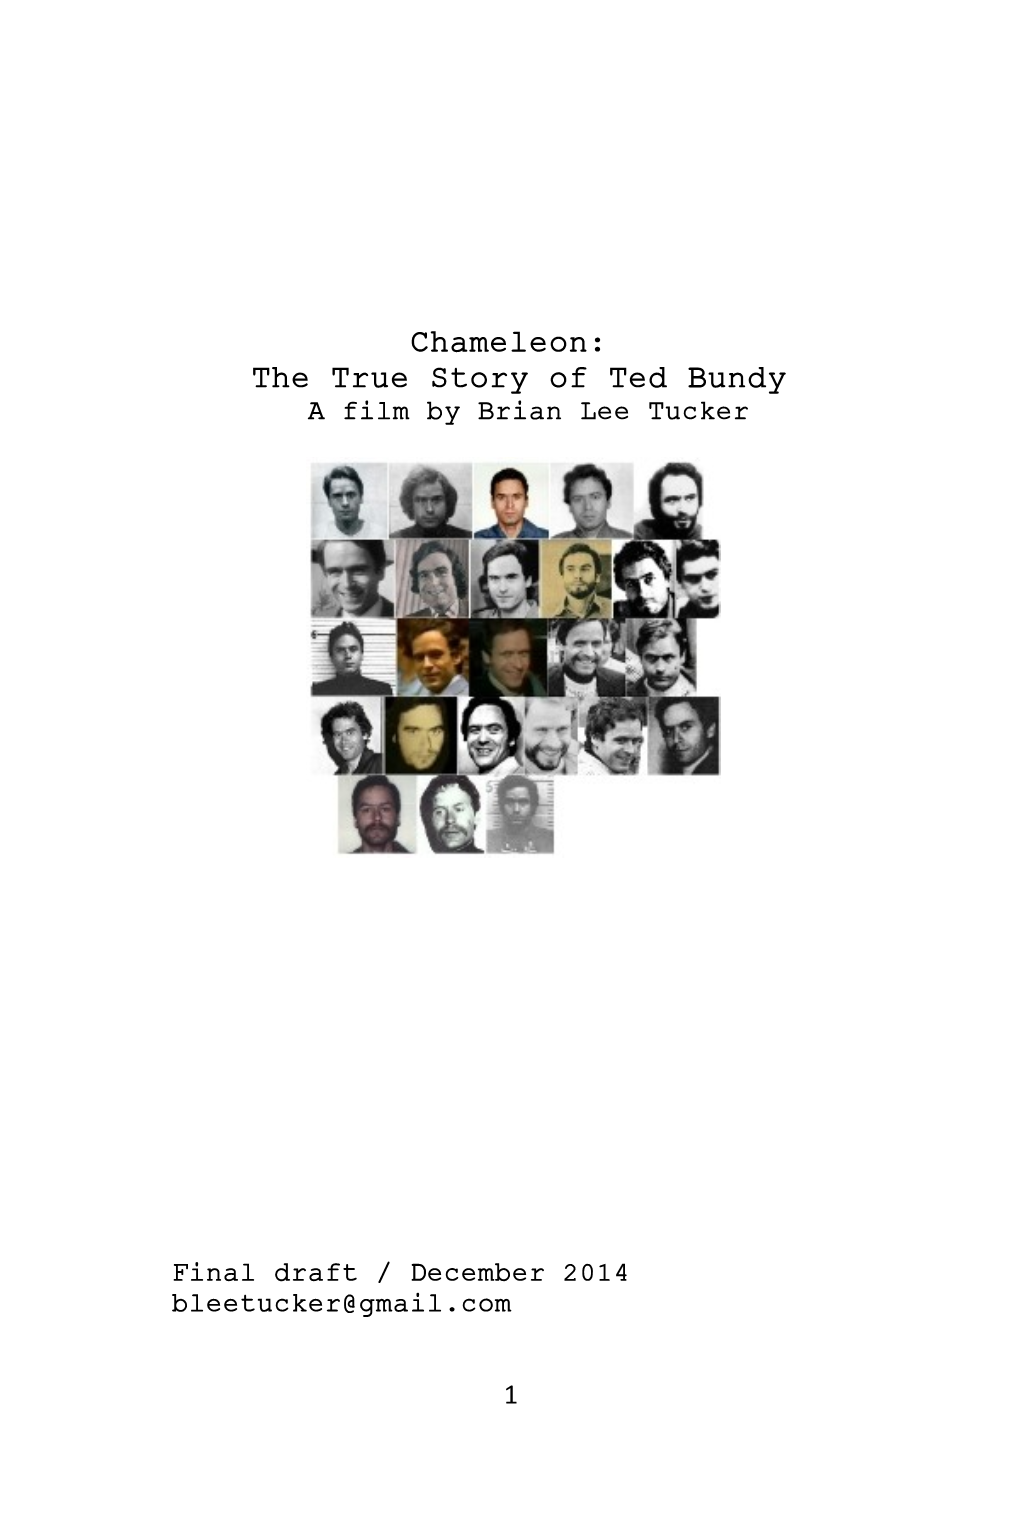 The True Story of Ted Bundy a Film by Brian Lee Tucker